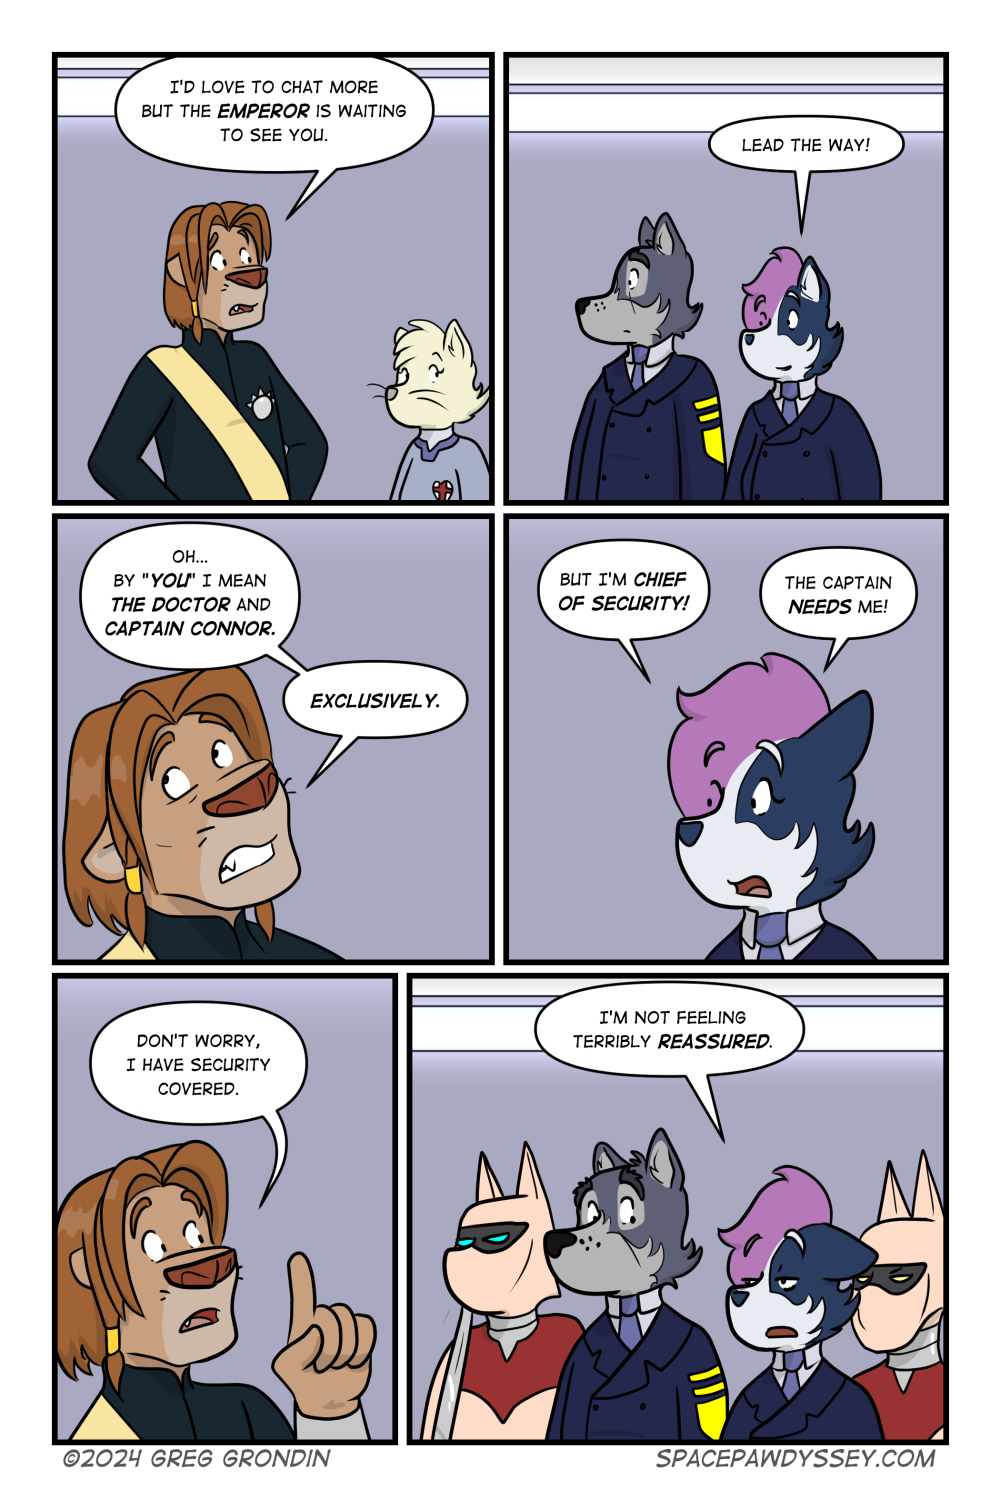 Space Pawdyssey #673